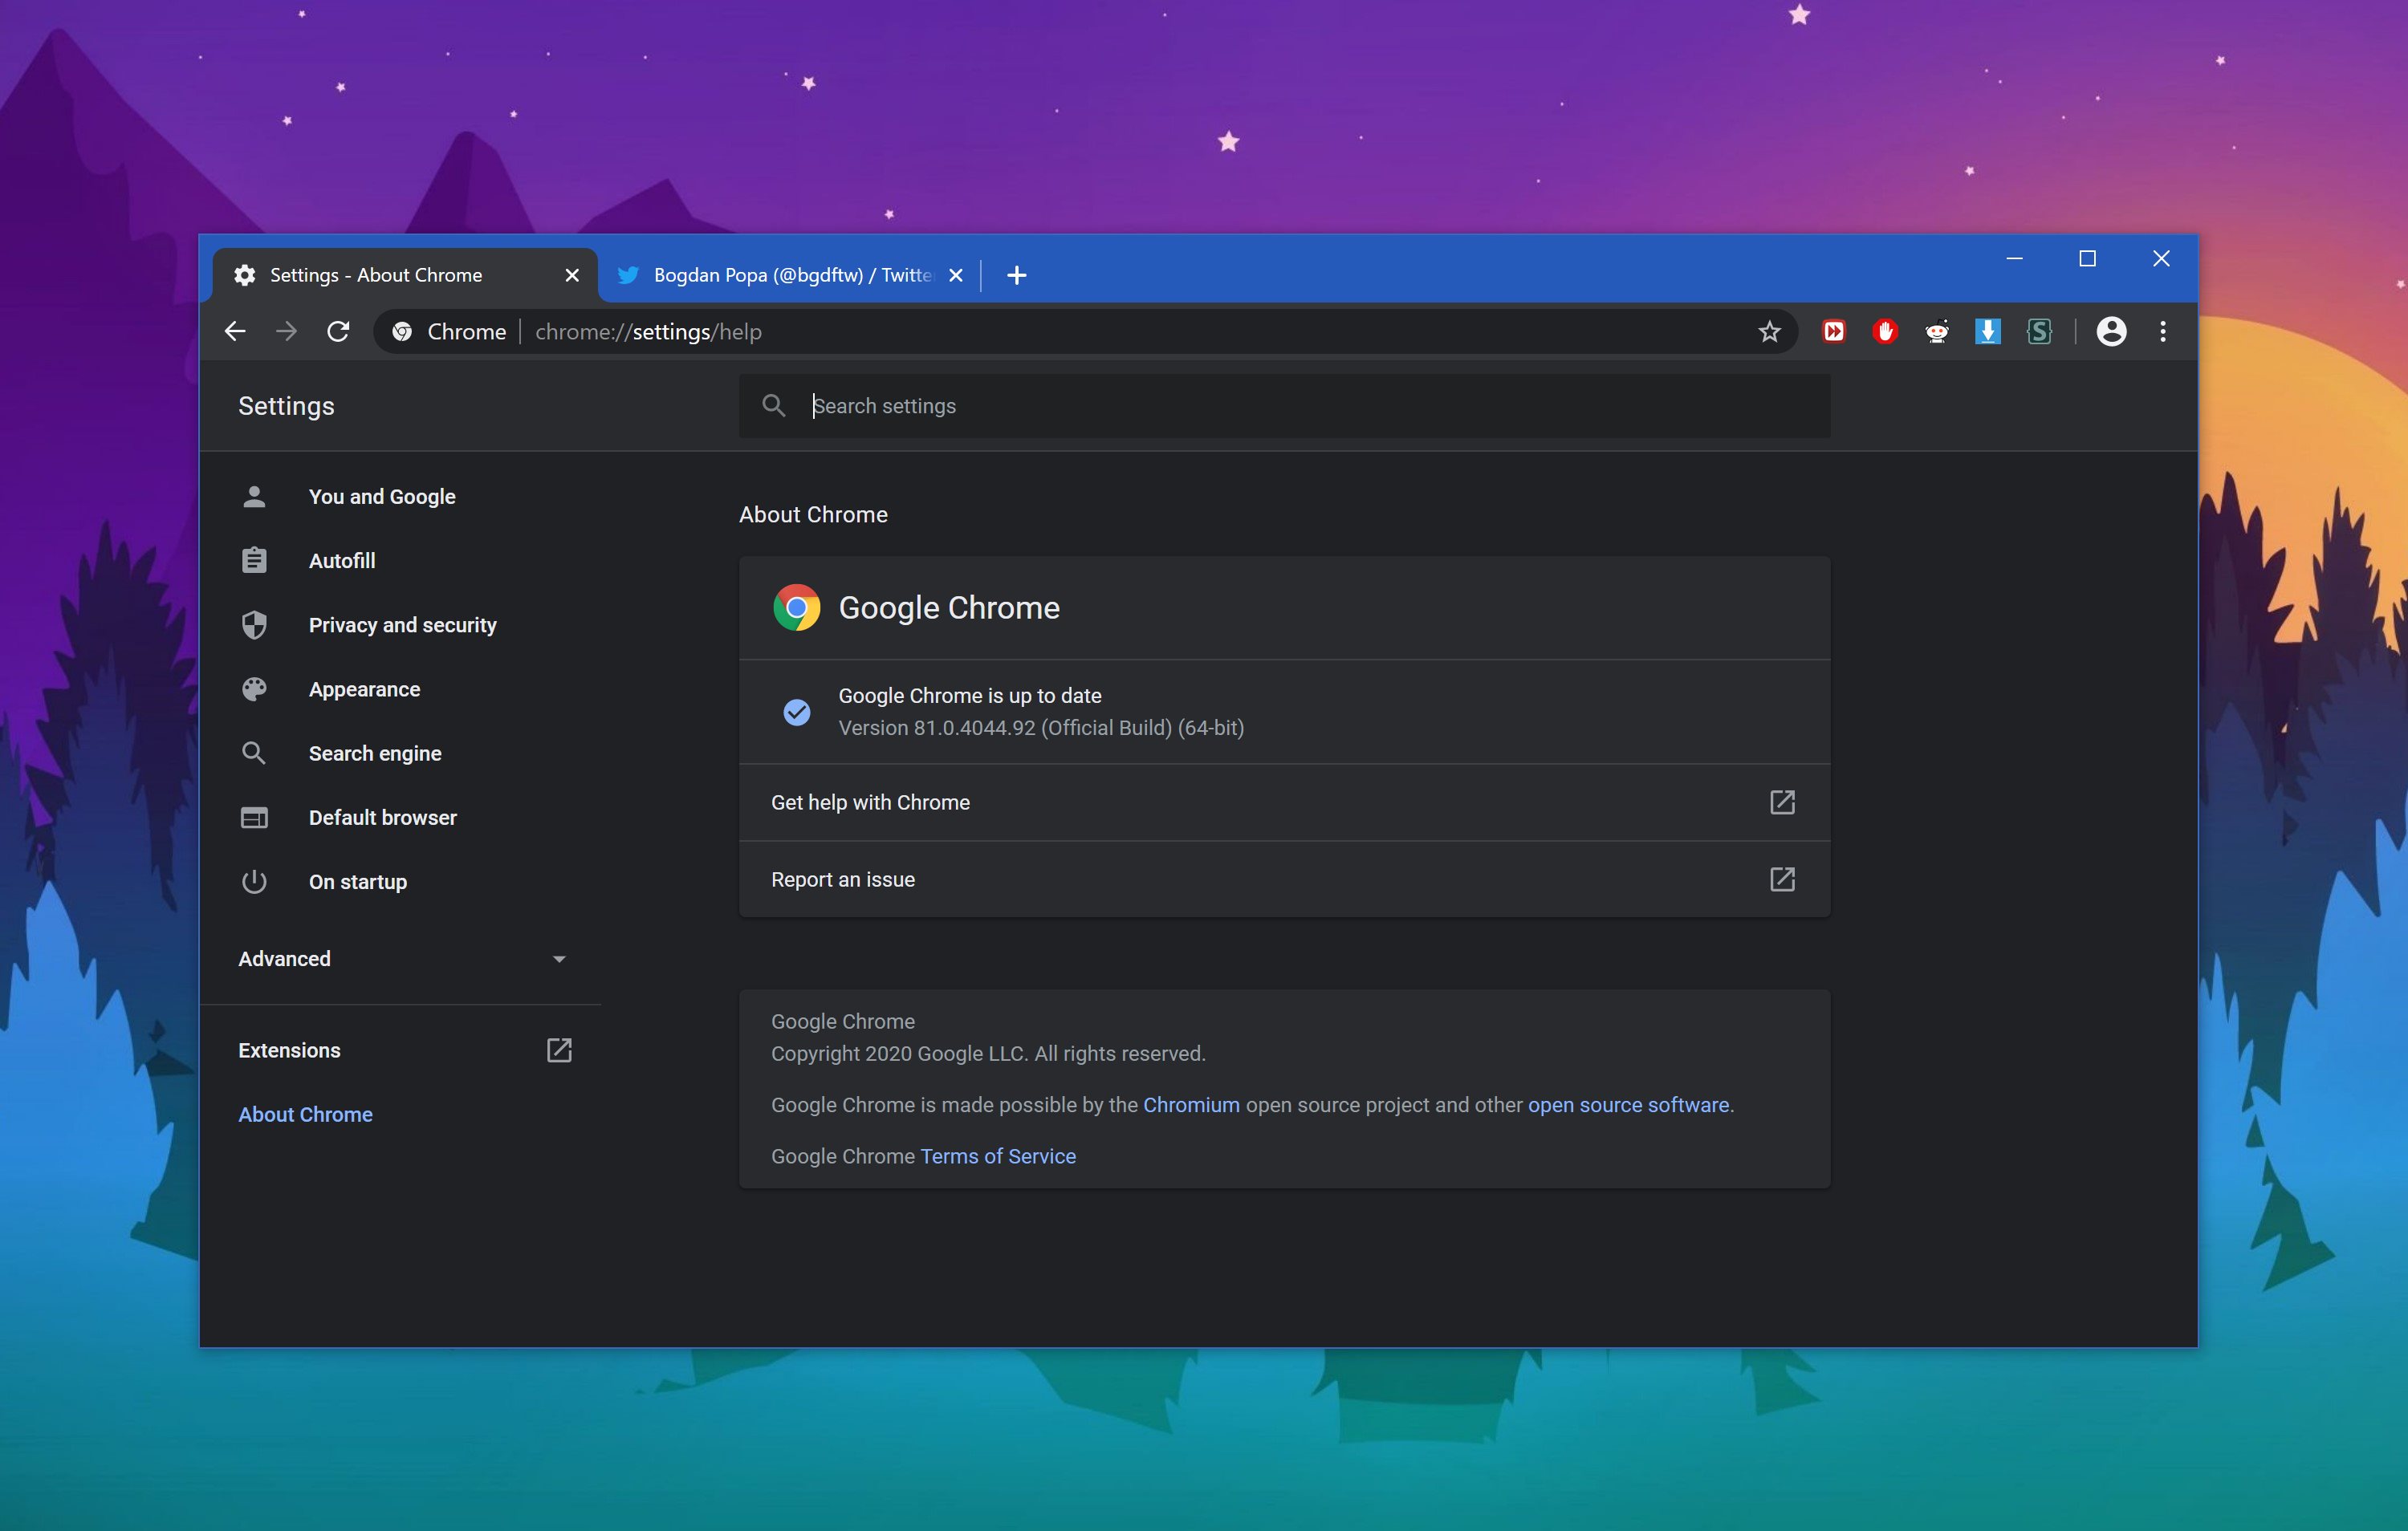 Google Chrome 81 Now Available For Download On Linux Windows And Mac